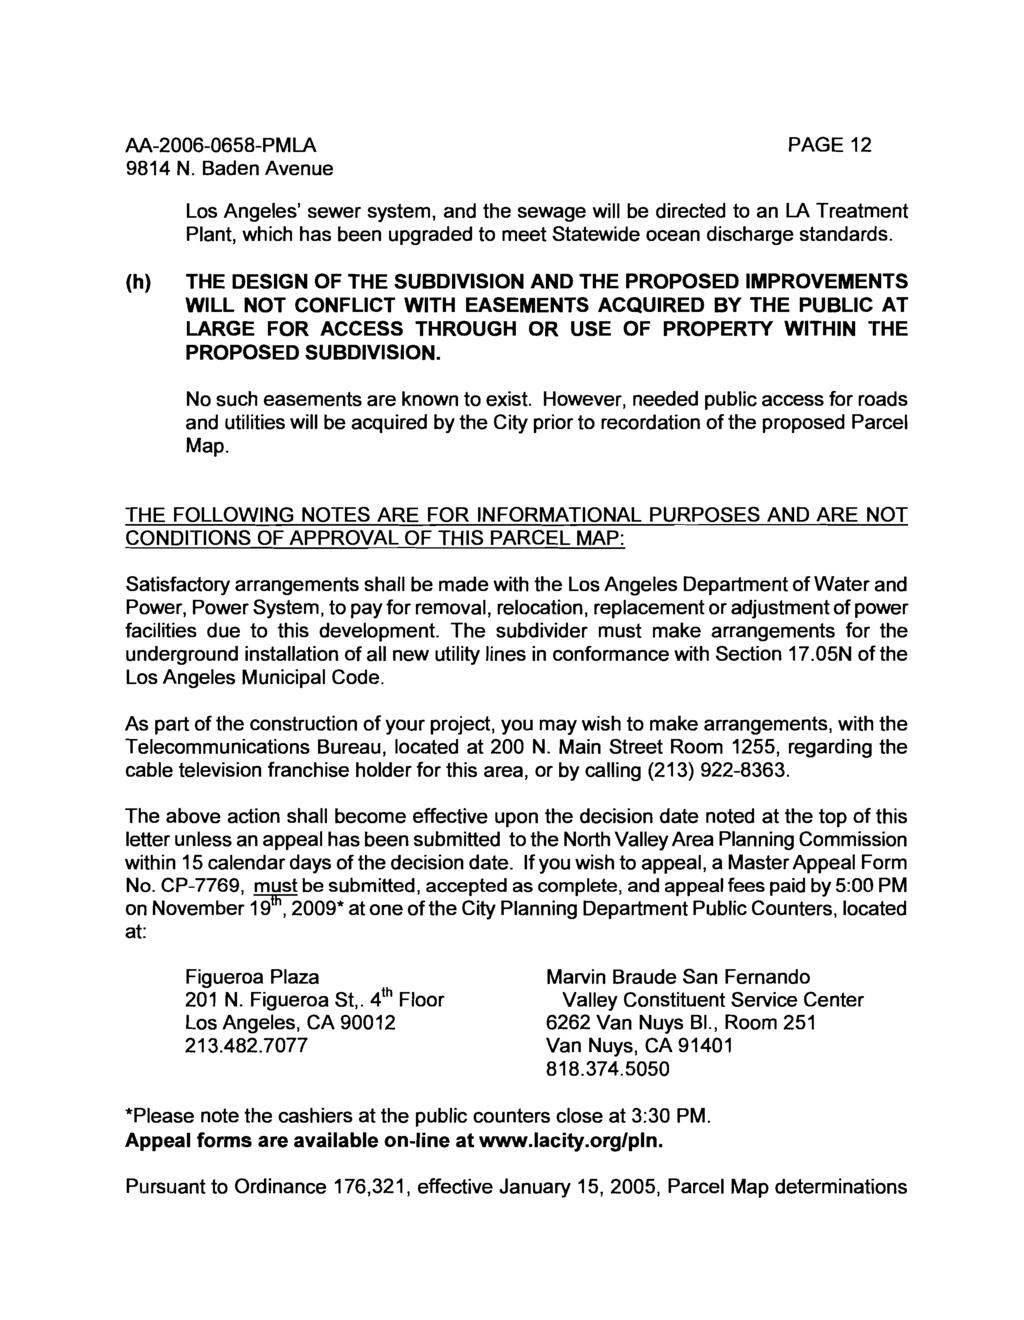 AA-2006-0658-PM LA PAGE 12 Los Angeles sewer system, and the sewage will be directed to an LA Treatment Plant, which has been upgraded to meet Statewide ocean discharge standards.